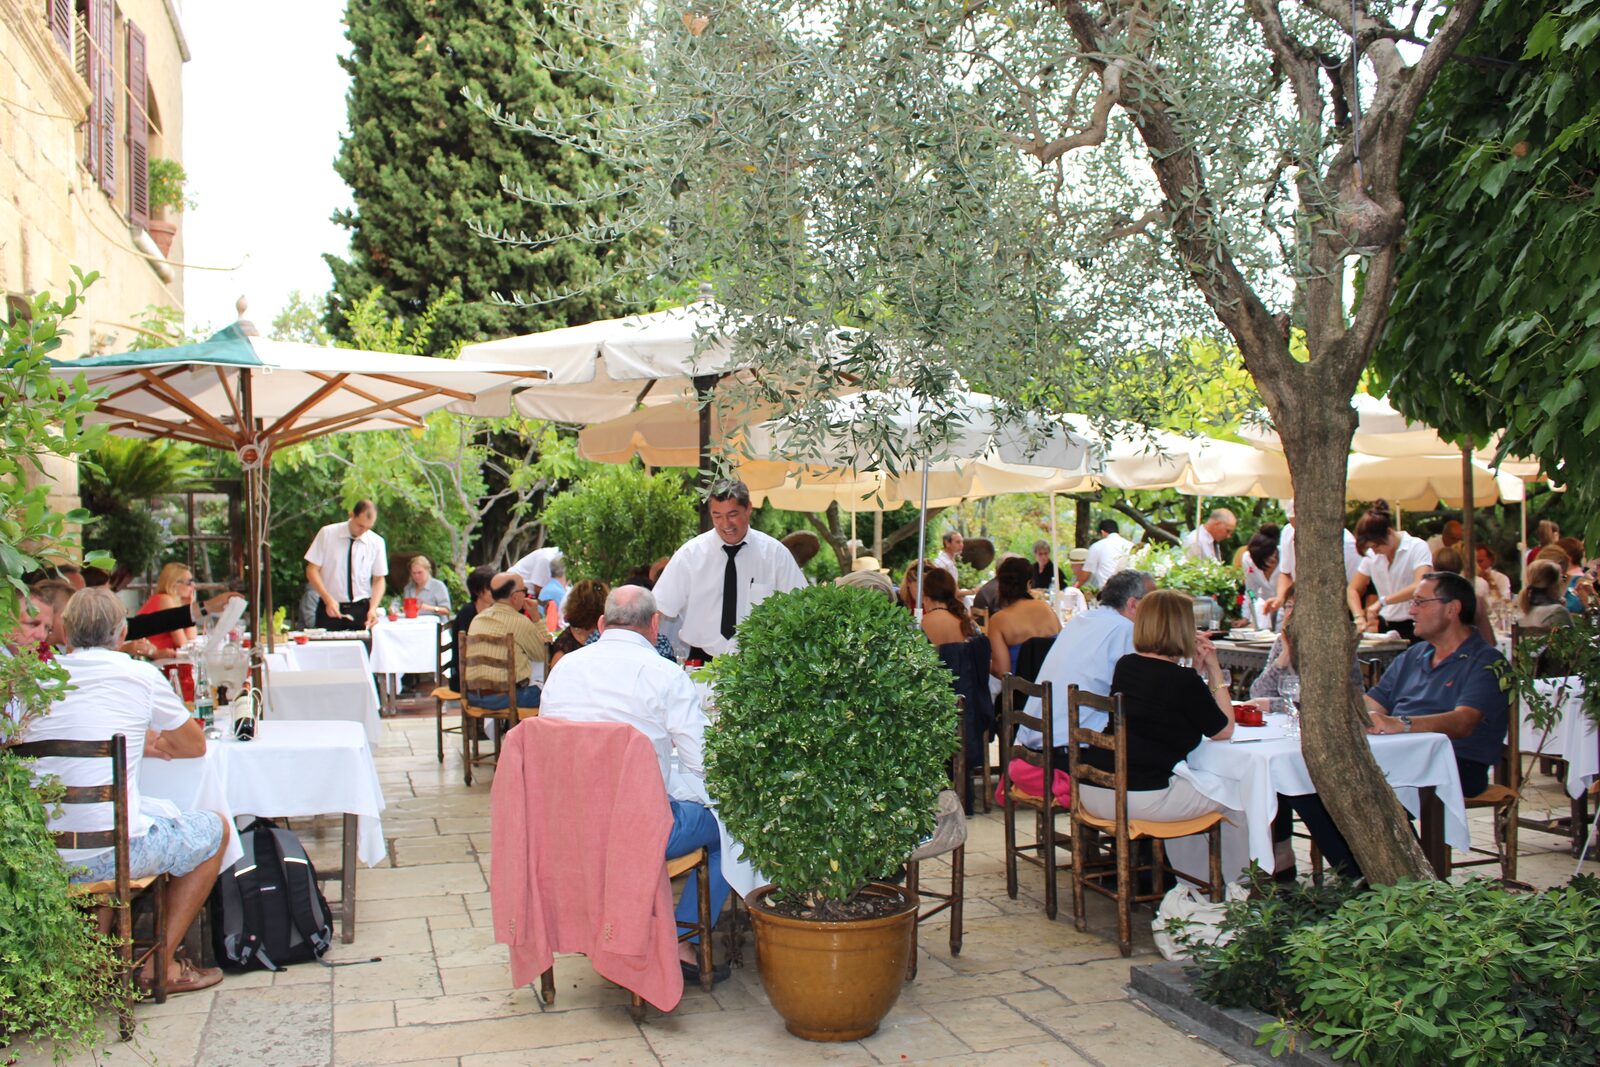 WHERE TO EAT IN ST PAUL DE VENCE? DISCOVER THE BEST RESTAURANTS